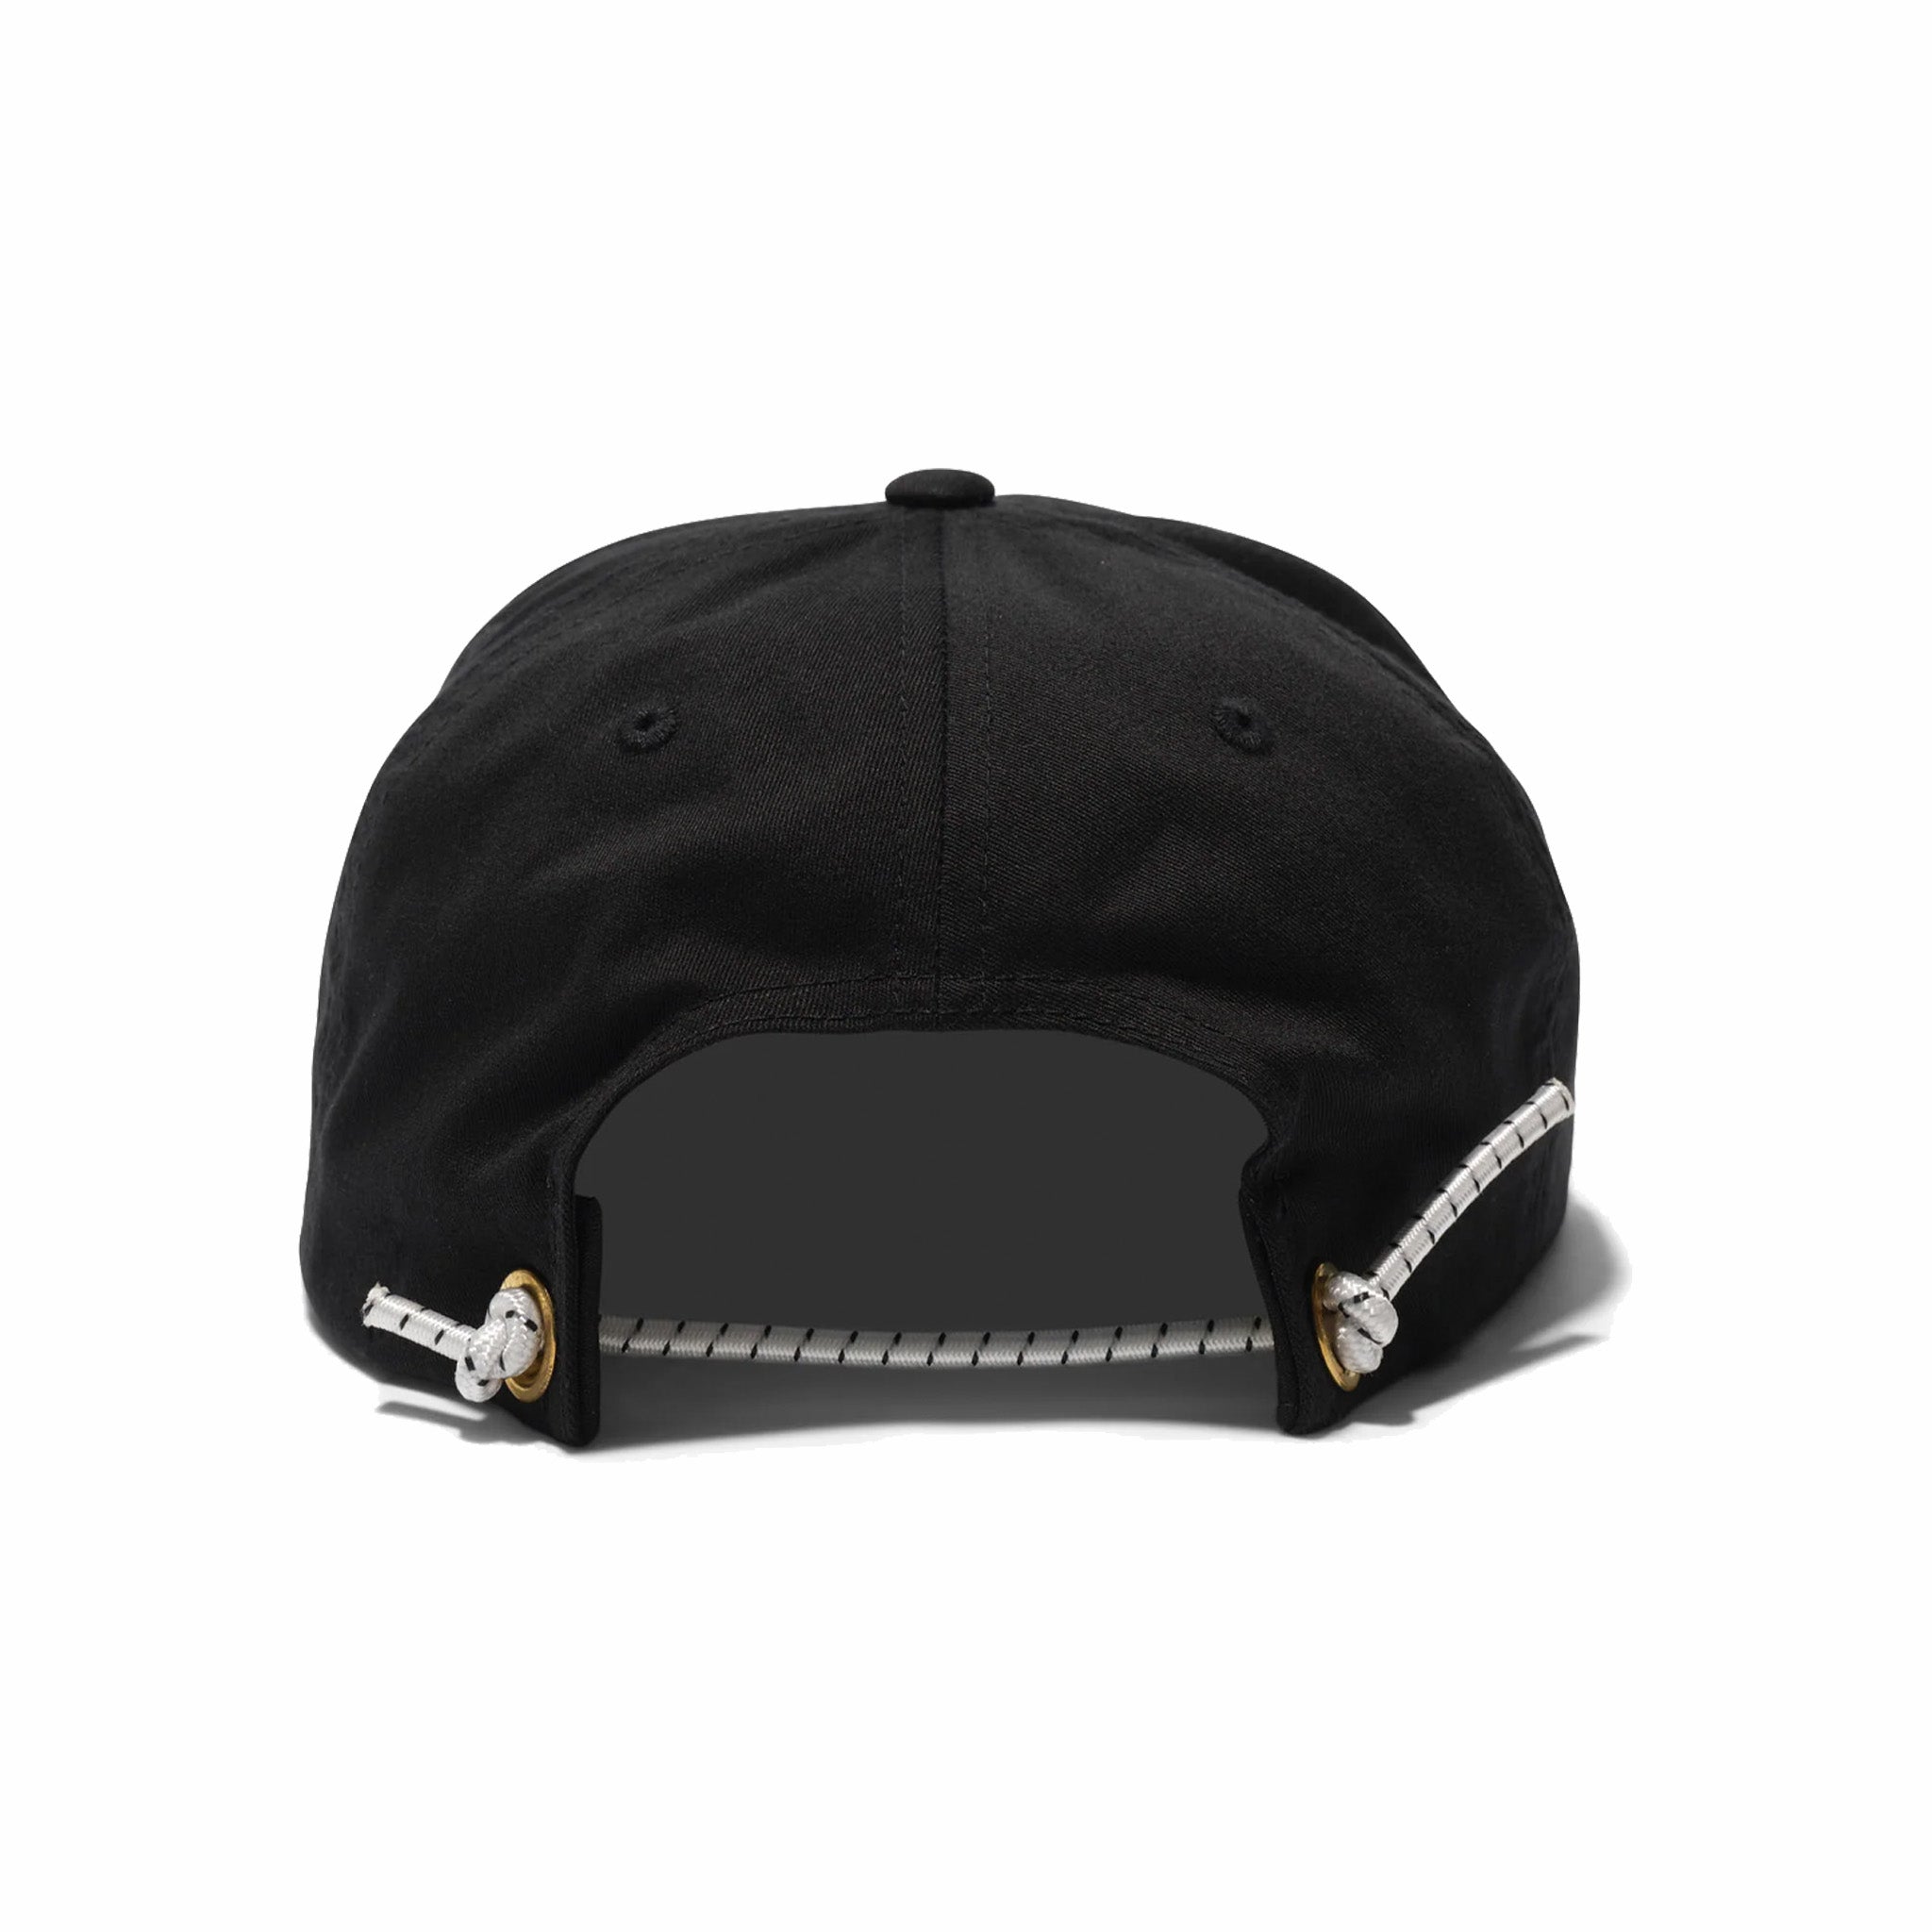 Western Hydrodynamic Research Promotional Hat (Black/Gray) - August Shop